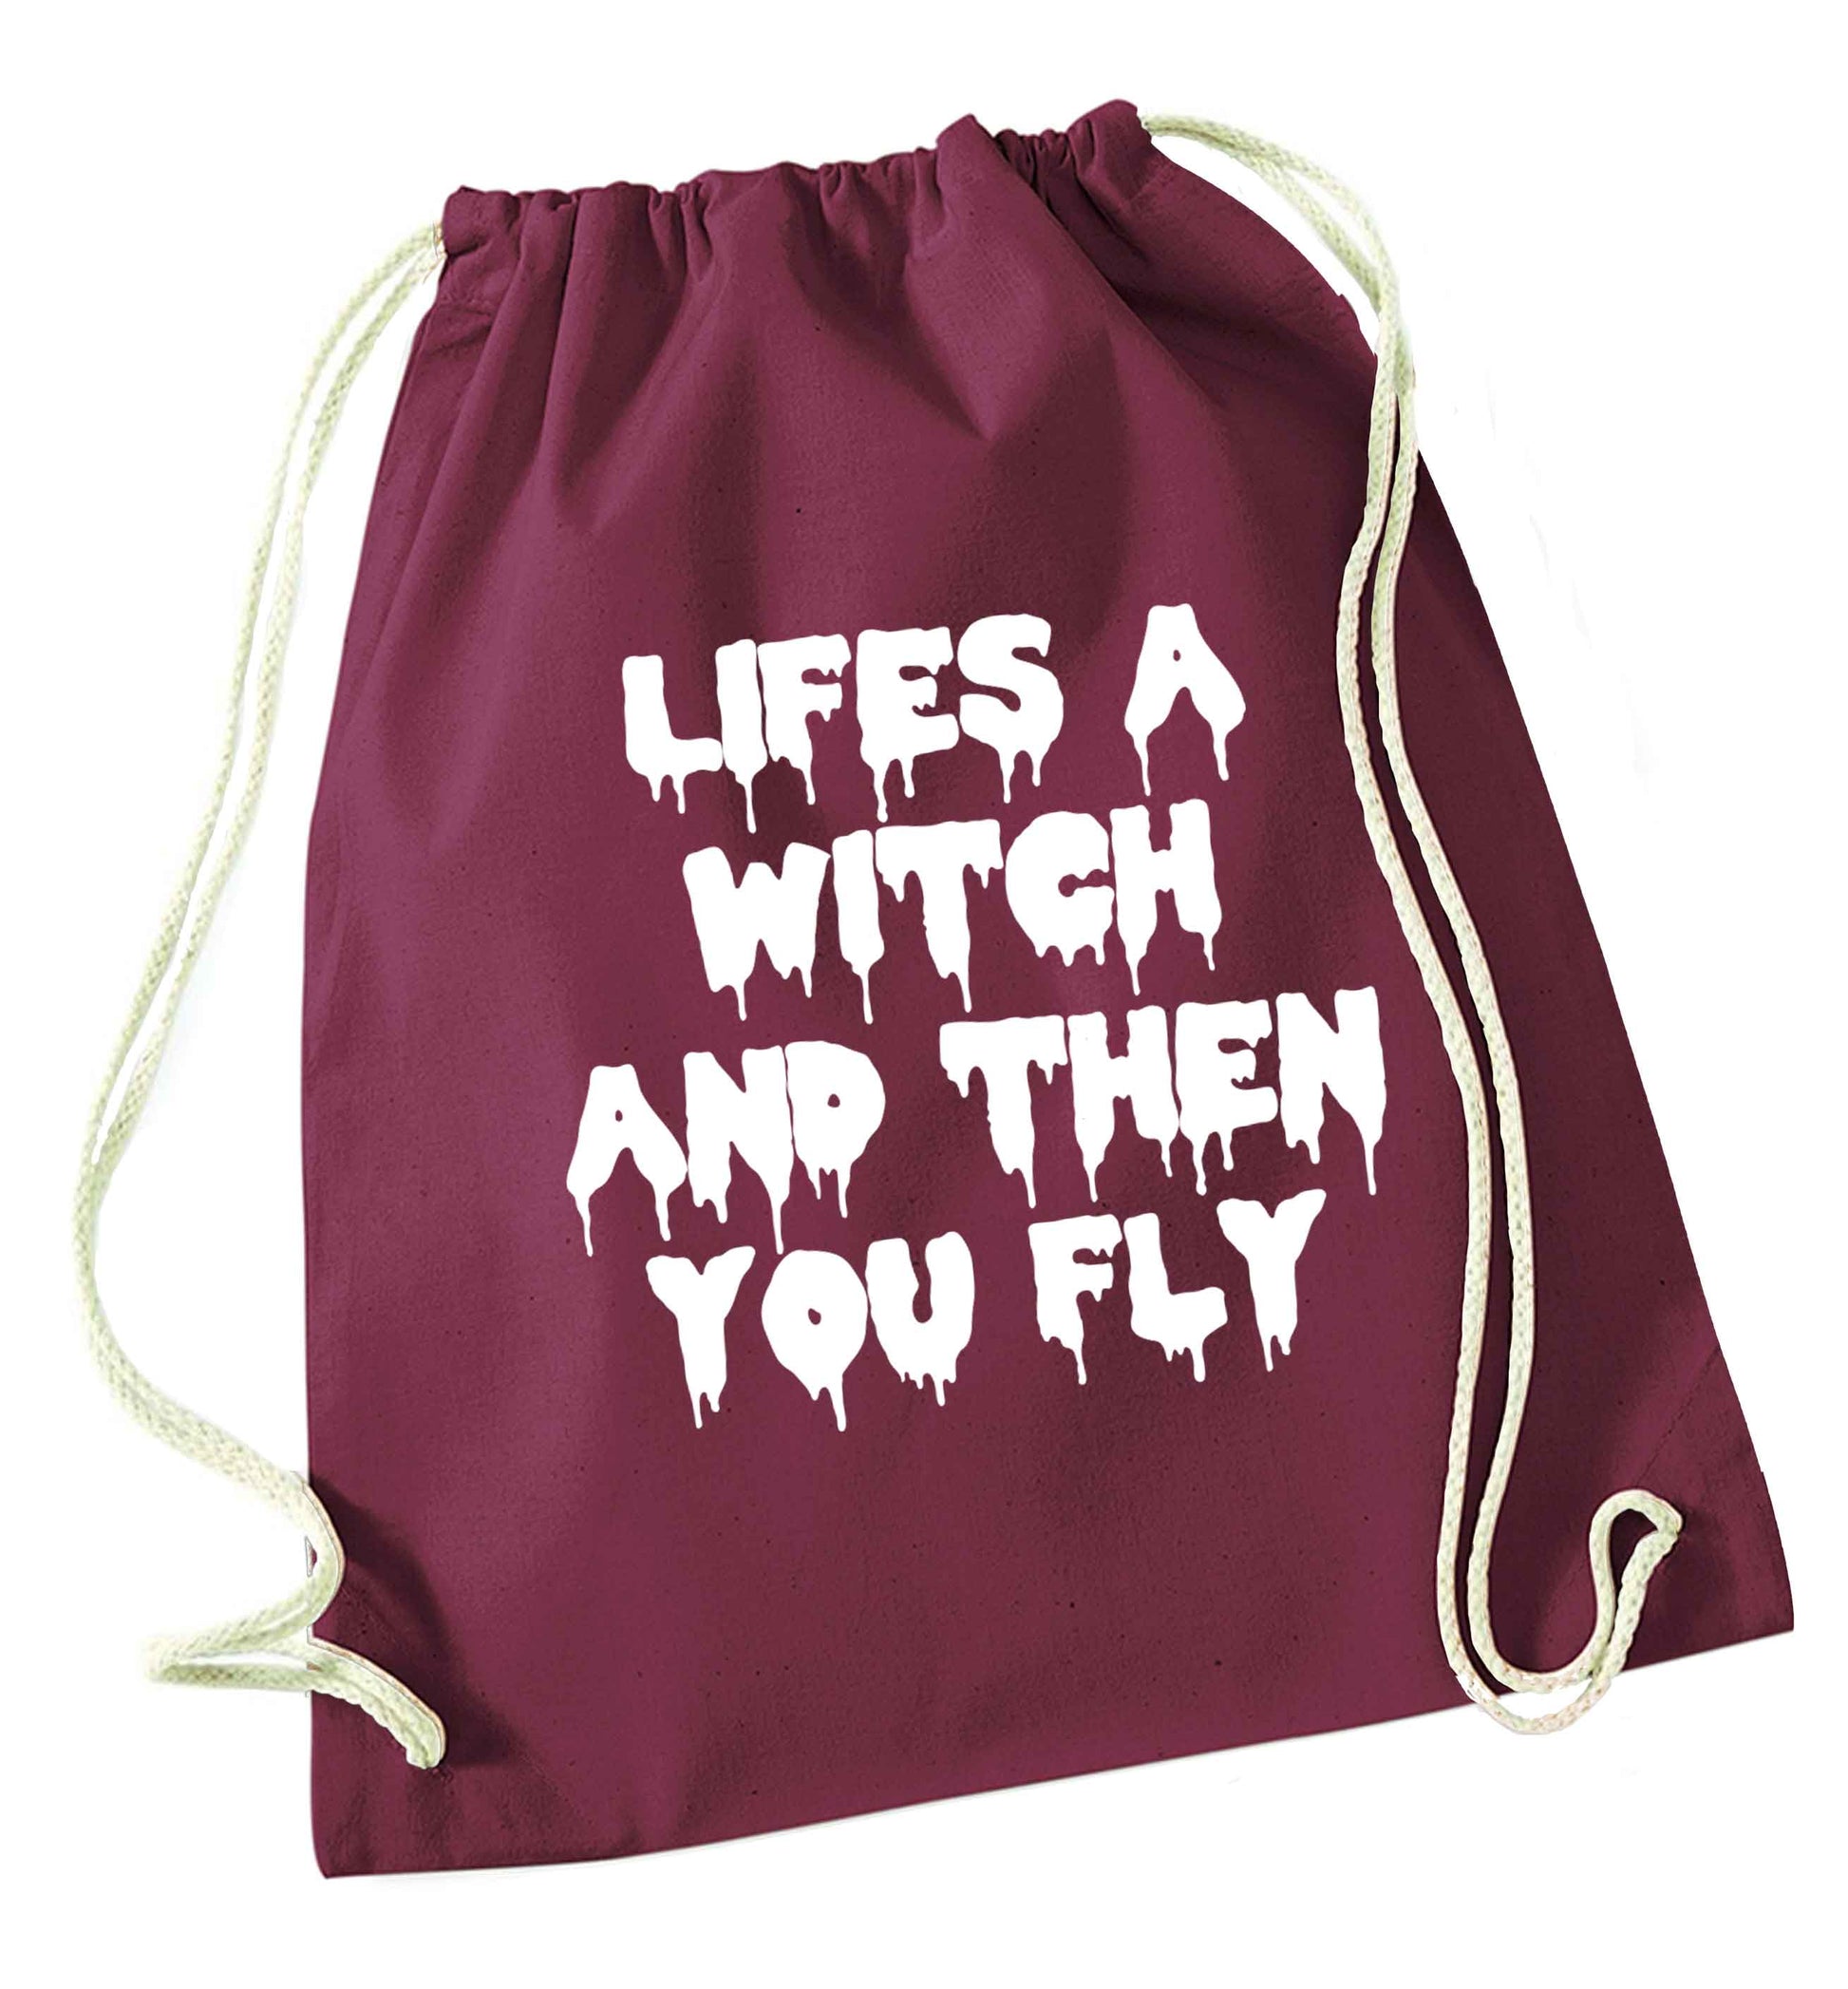 Life's a witch and then you fly maroon drawstring bag